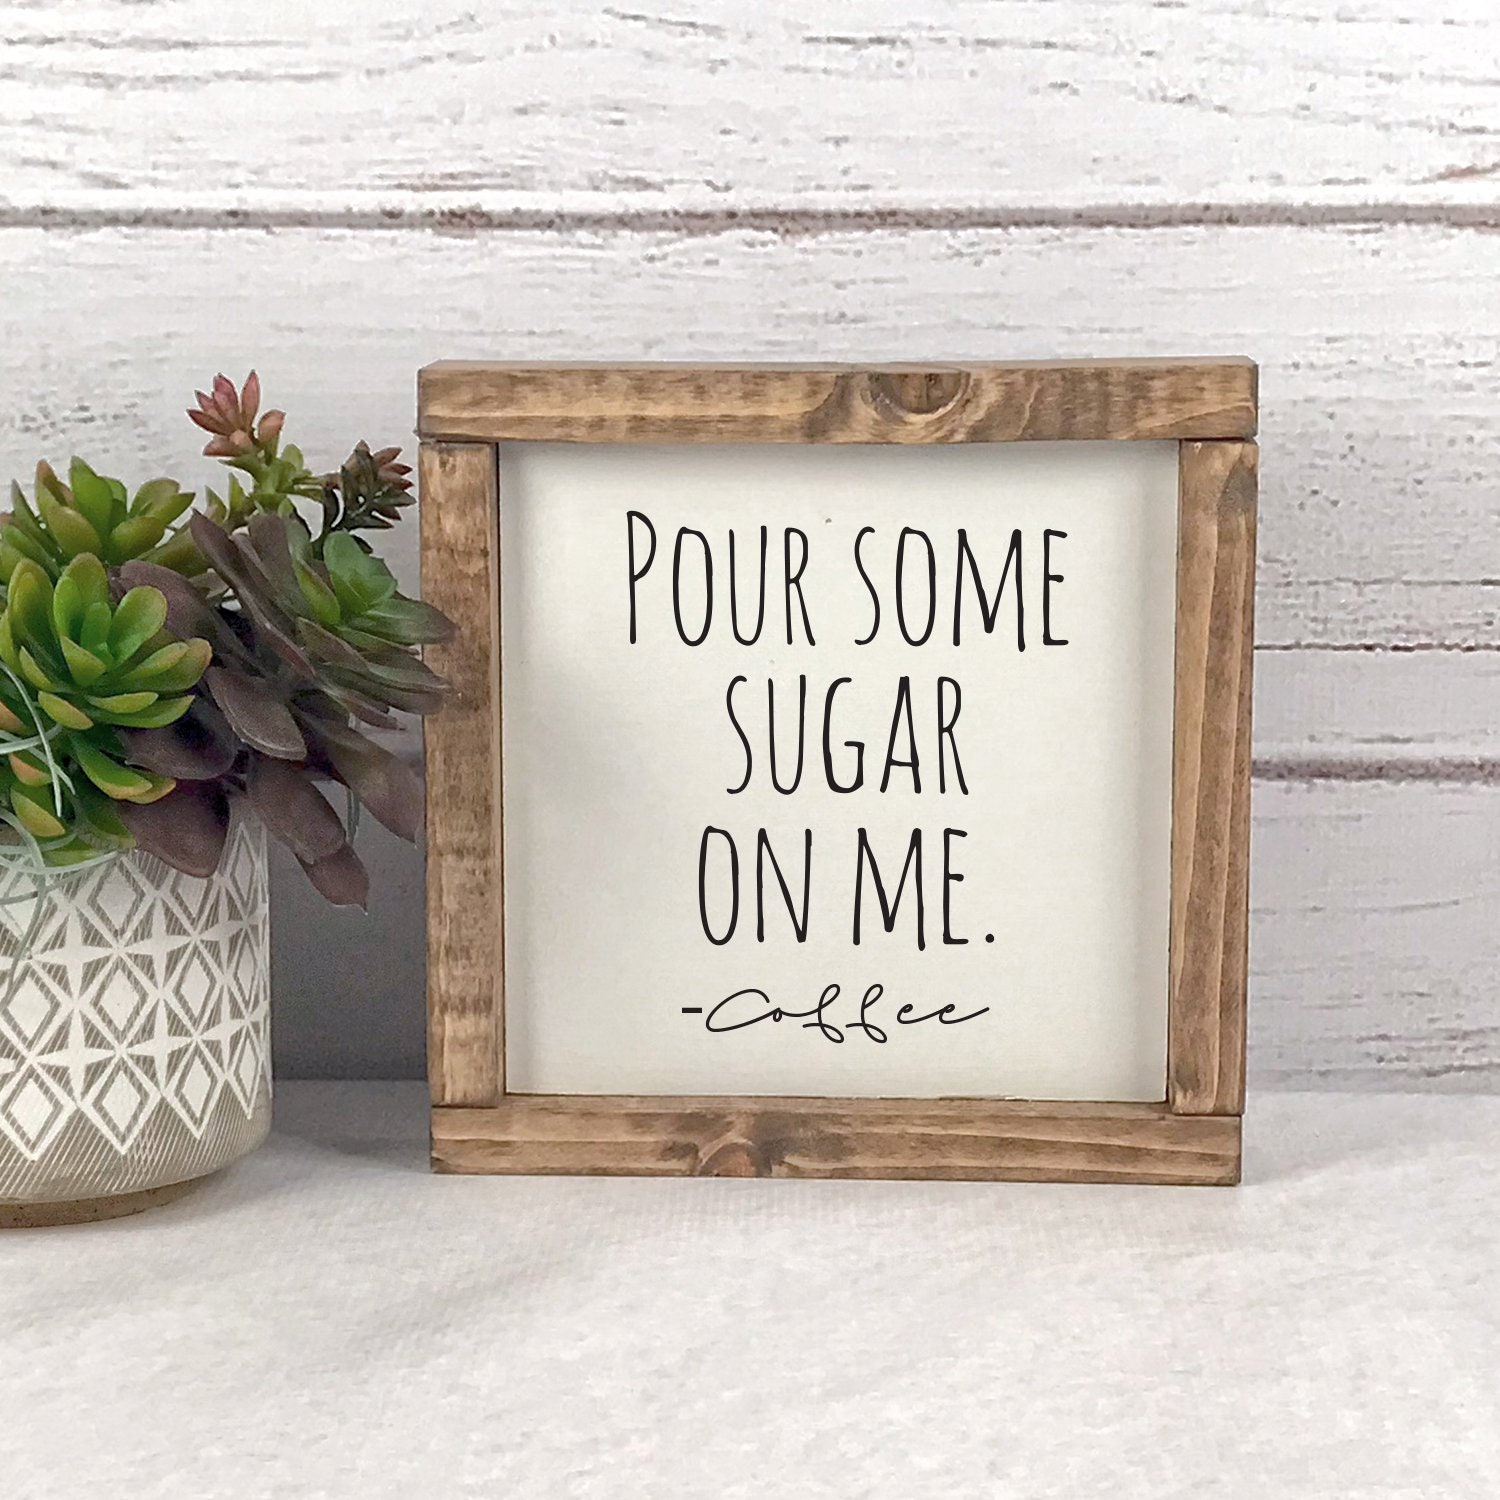 Coffee Sign and But First Coffee Wood Wall Sign for Kitchen Office Home Wall Table Decor 4.7 x 13.8 Inch White, Black 2 Pieces Coffee Bar Decor Farmhouse Coffee Signs Pour Some Sugar on Me